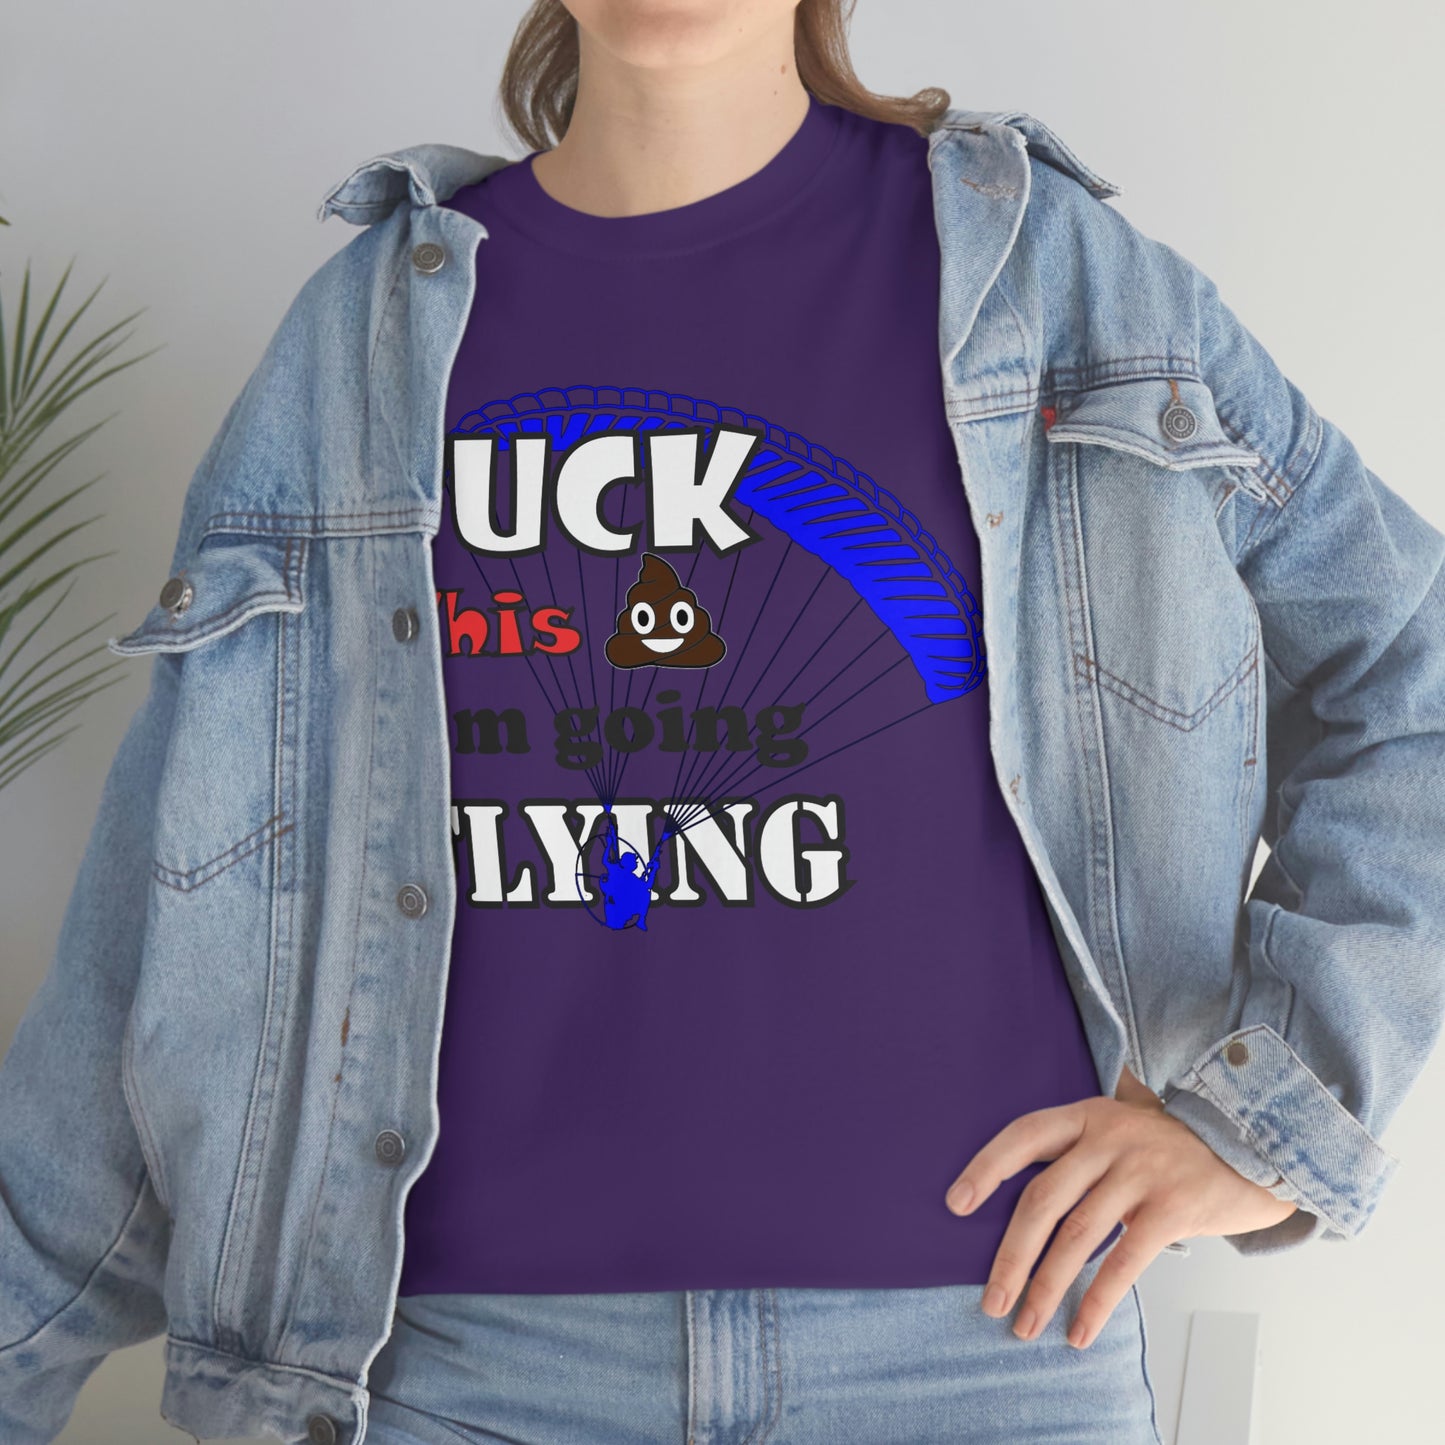 Fuck This Shit I'm Going Flying Unisex Heavy Cotton Tee